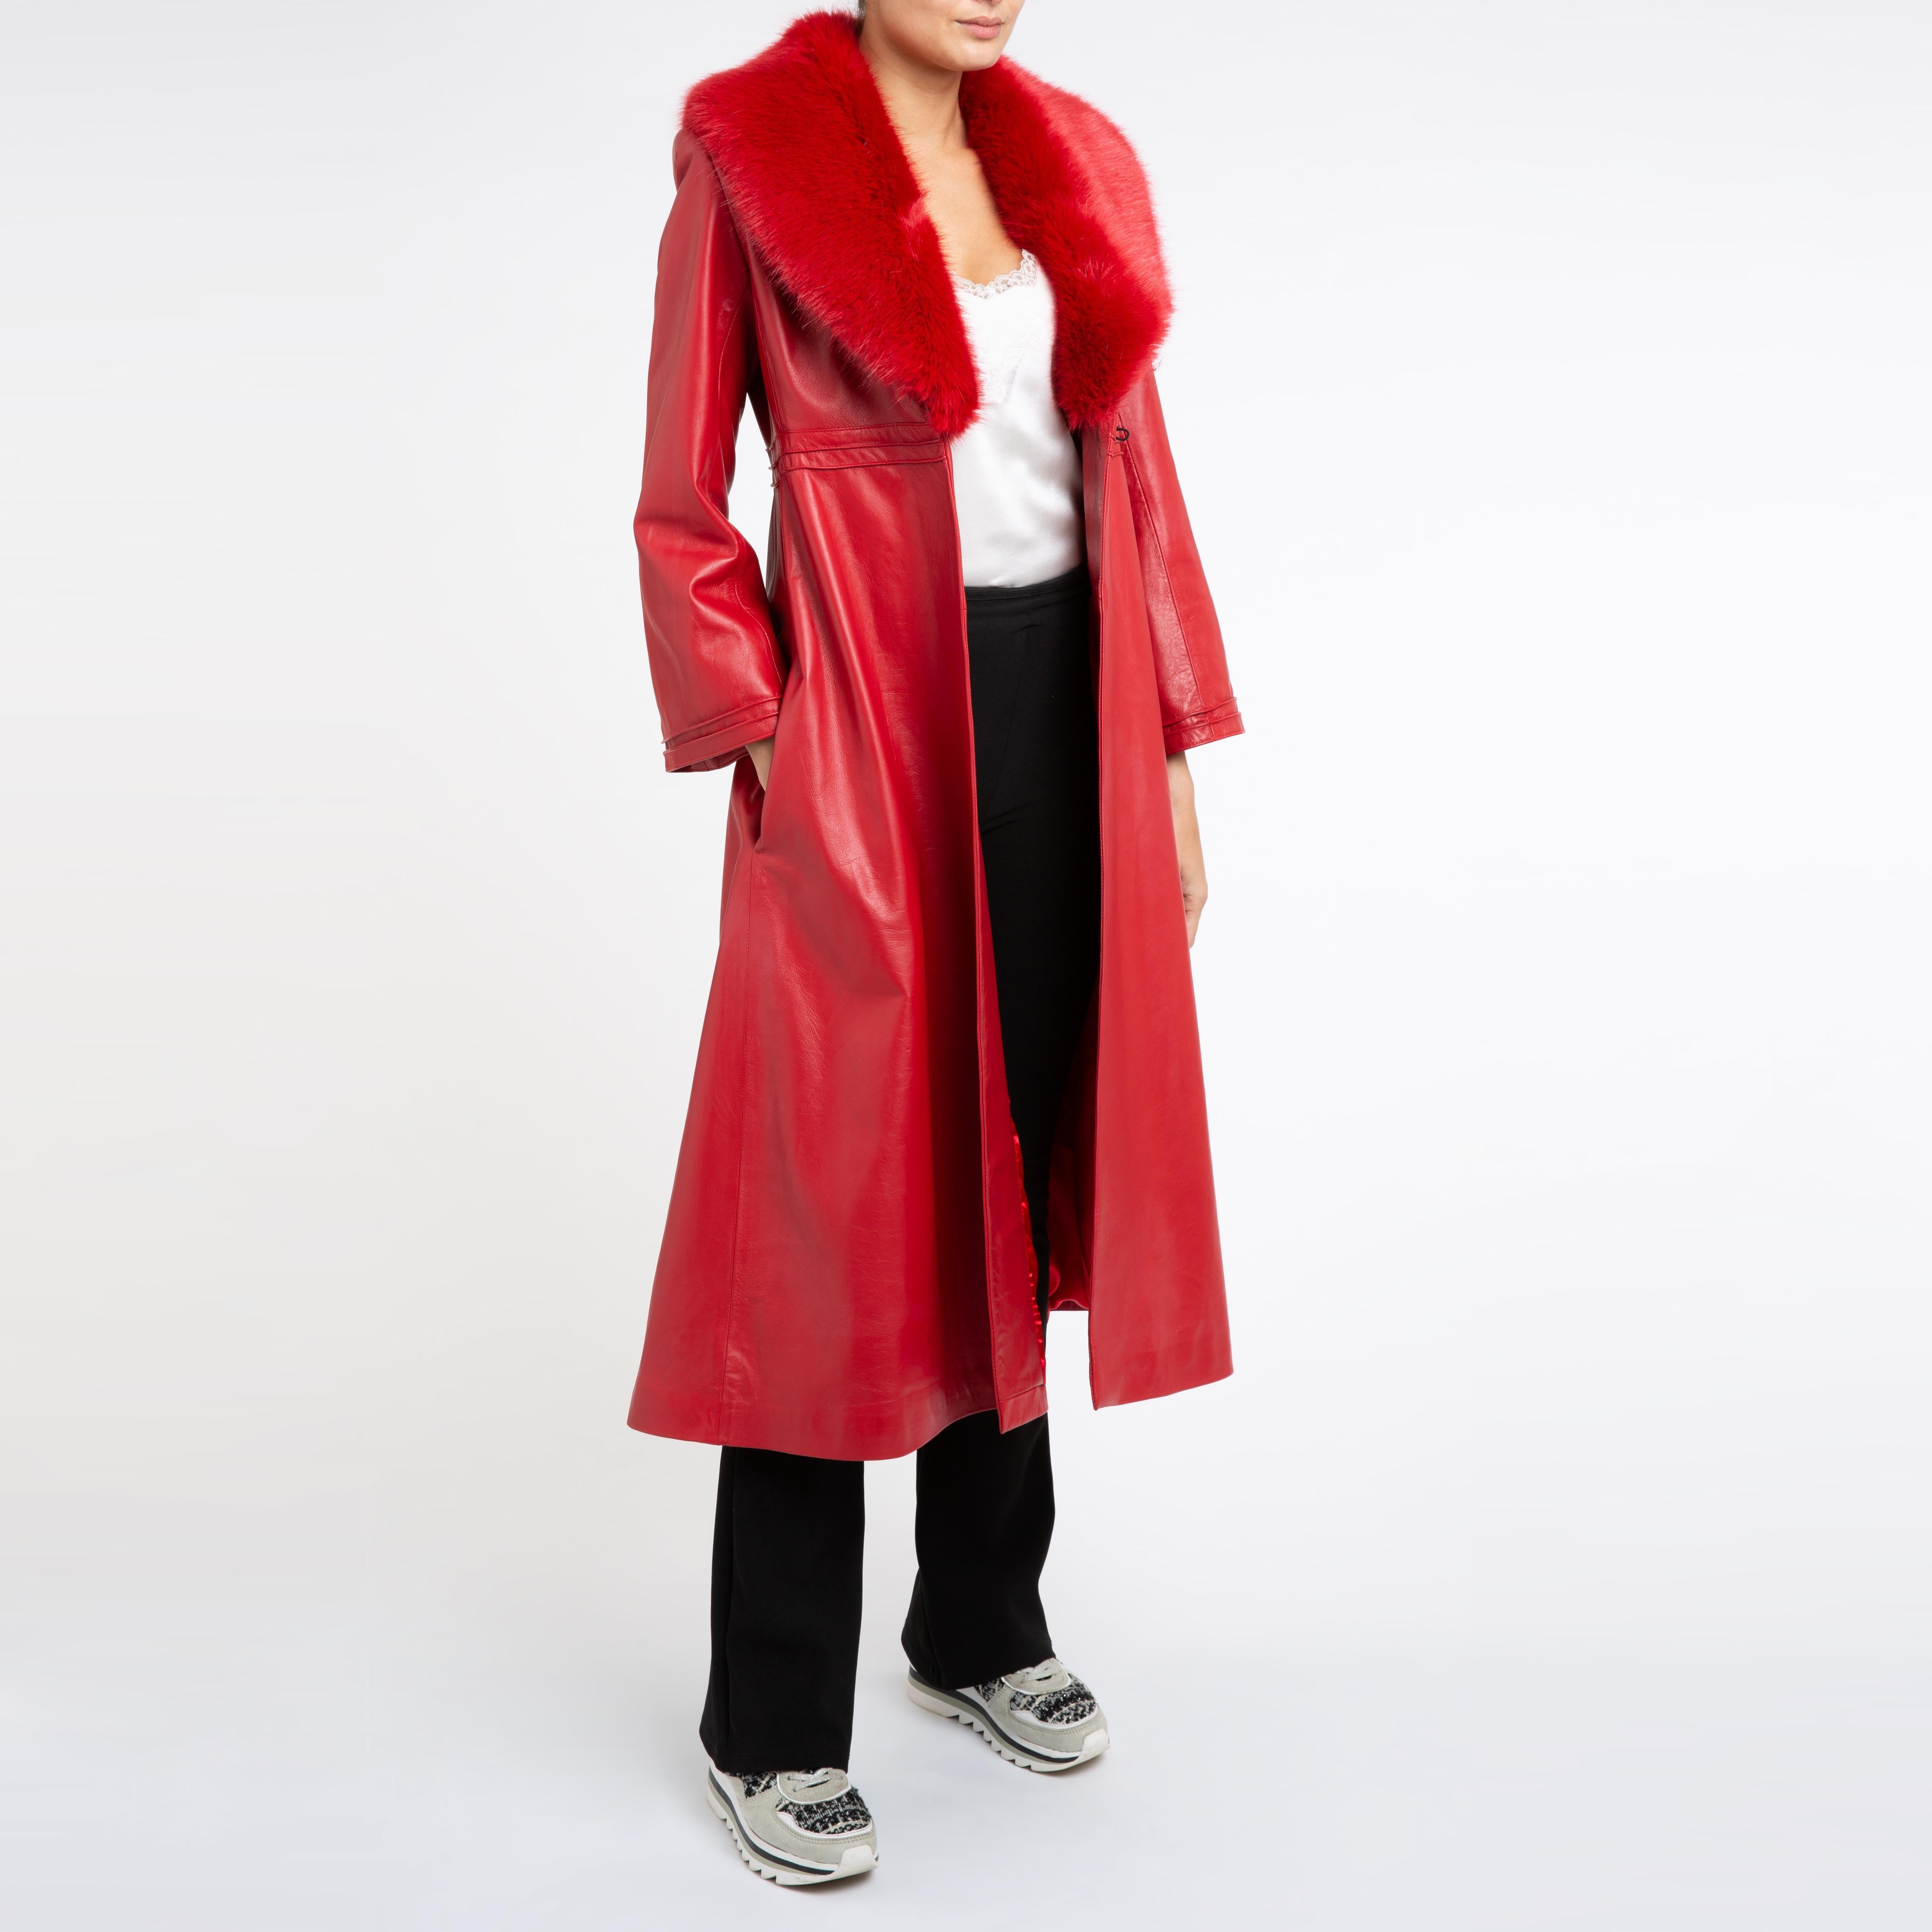 Verheyen London Edward Leather Coat with Faux Fur Collar in Red - Size uk 14

The Edward Leather Coat created by Verheyen London is a romantic design inspired by the 1970s and Edwardian Era of Fashion.  A timeless design to be be worn for a lifetime